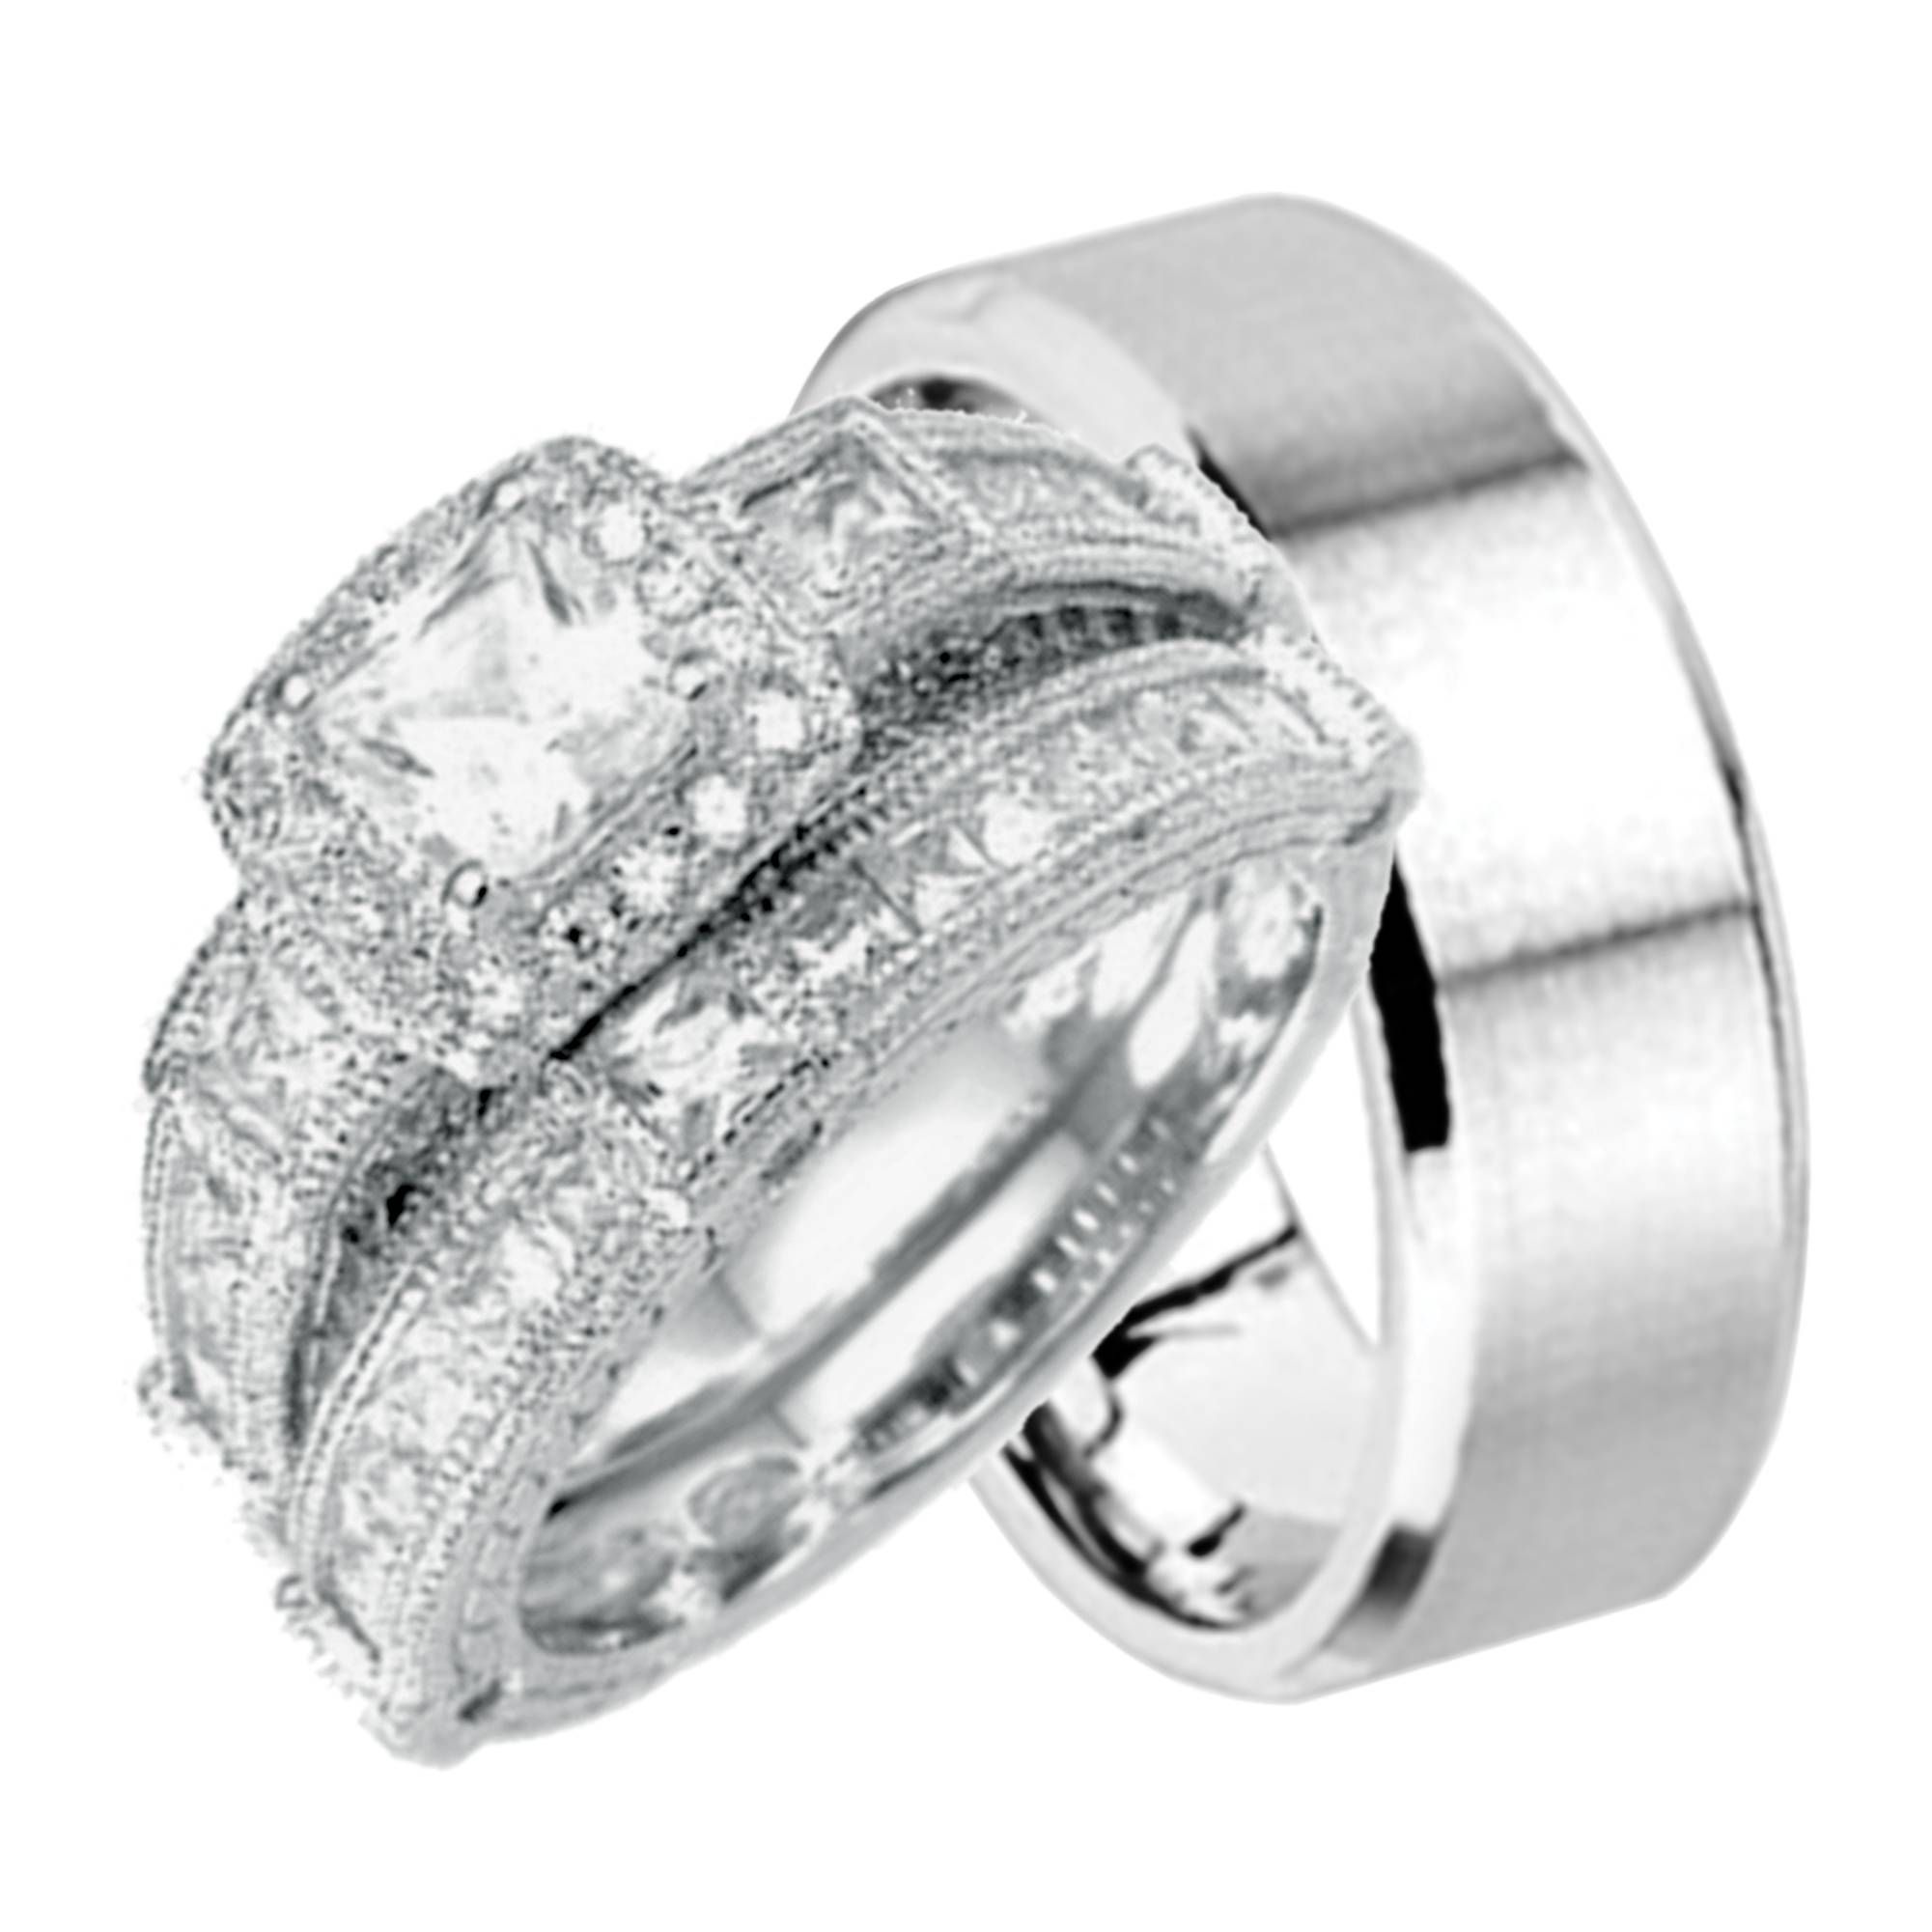 Wedding Ring Sets For Him & Her Throughout Wedding Bands Set For Him And Her (View 7 of 15)